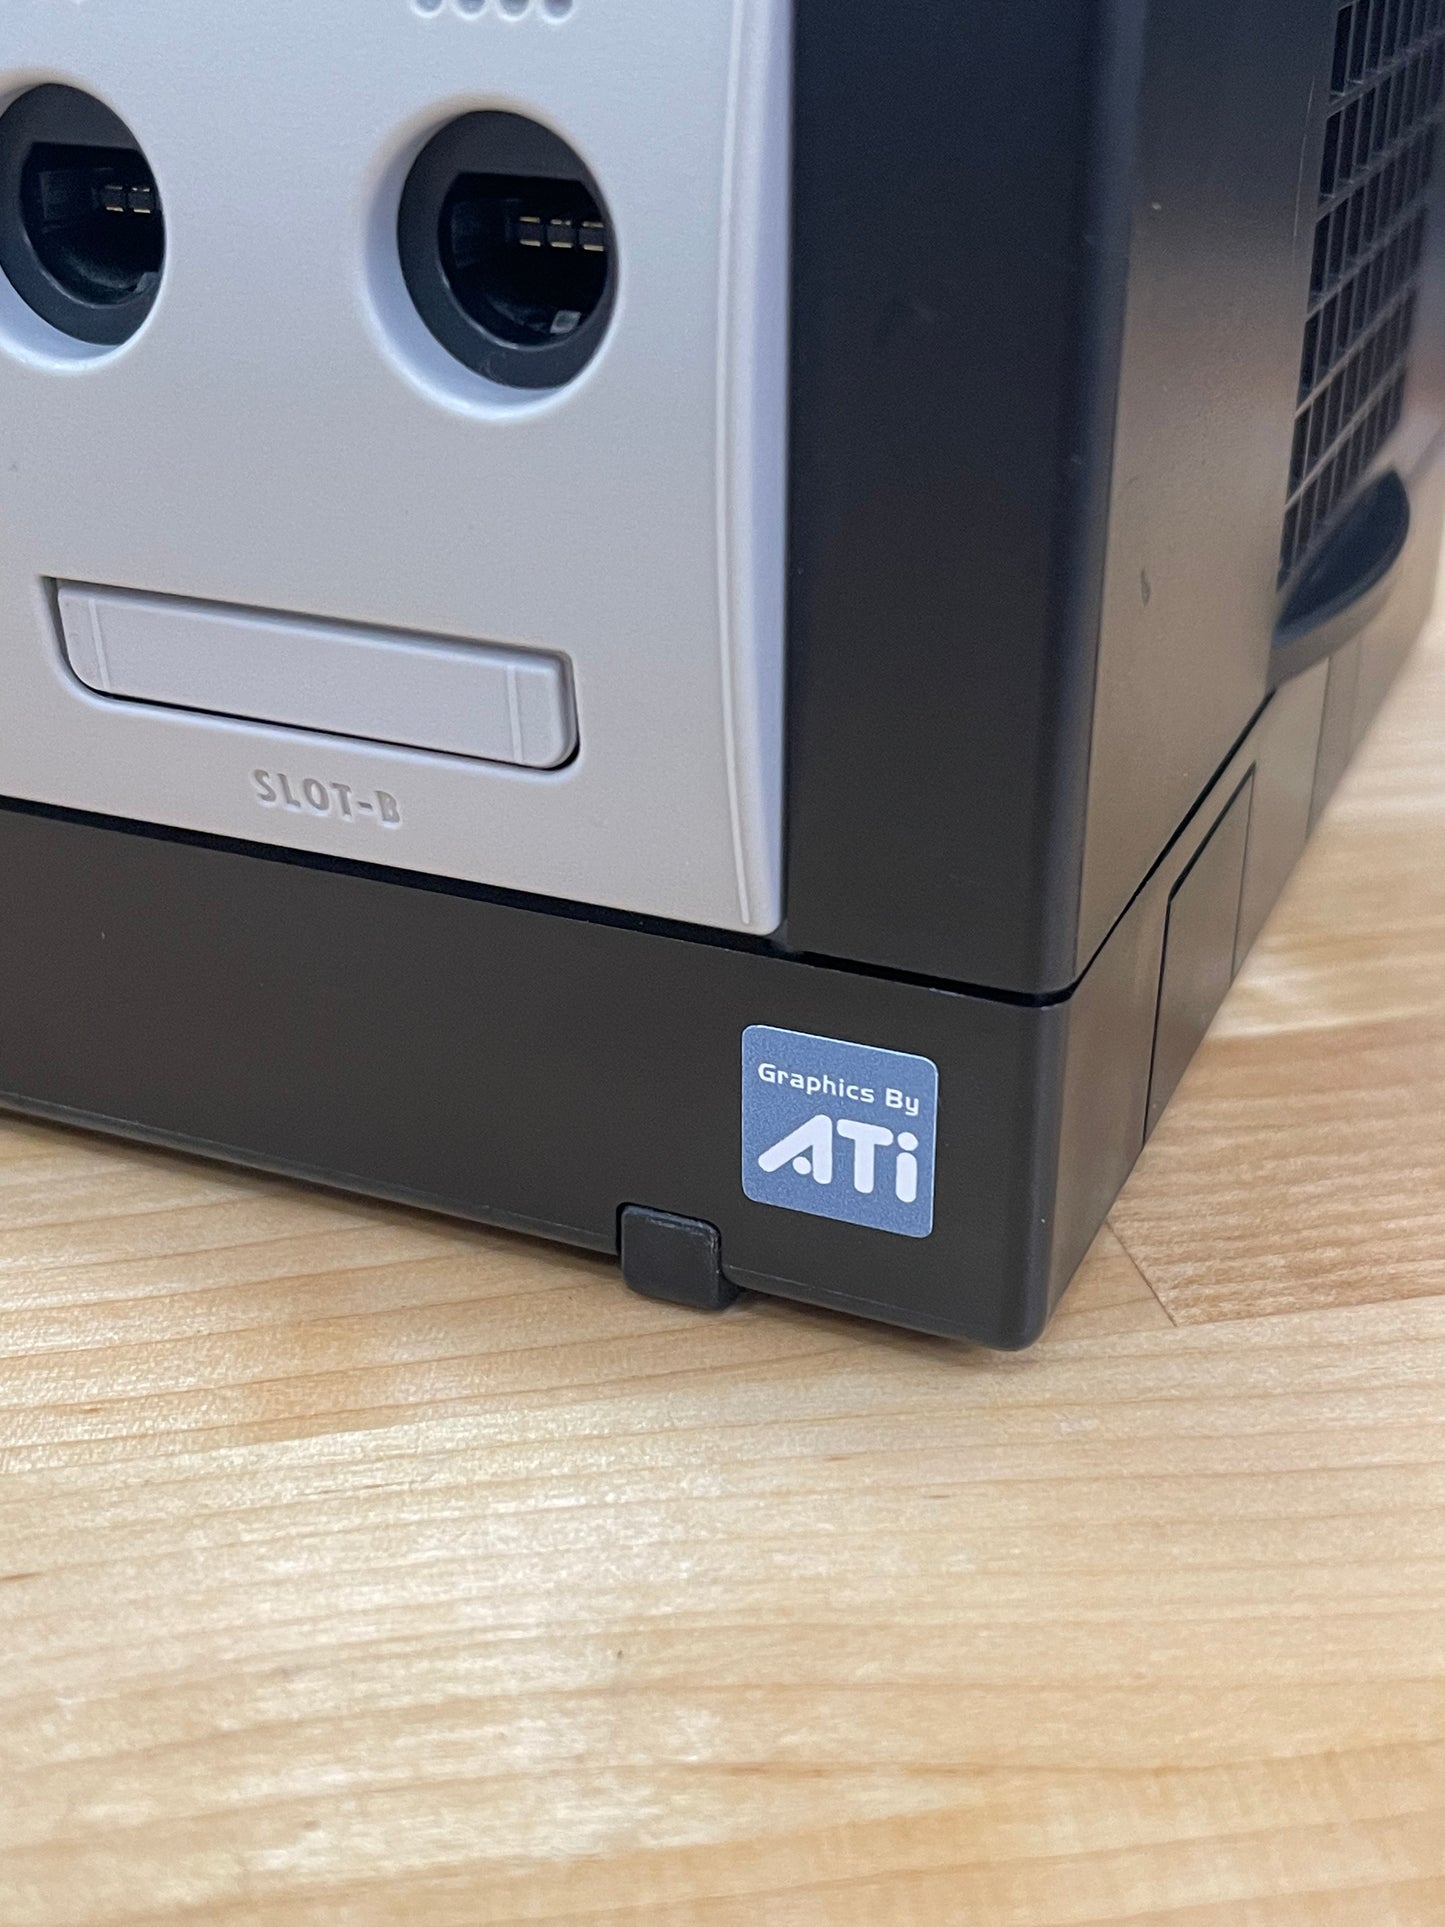 GameCube > Graphics by ATi < Replacement / Alternative GC Console Badge Sticker